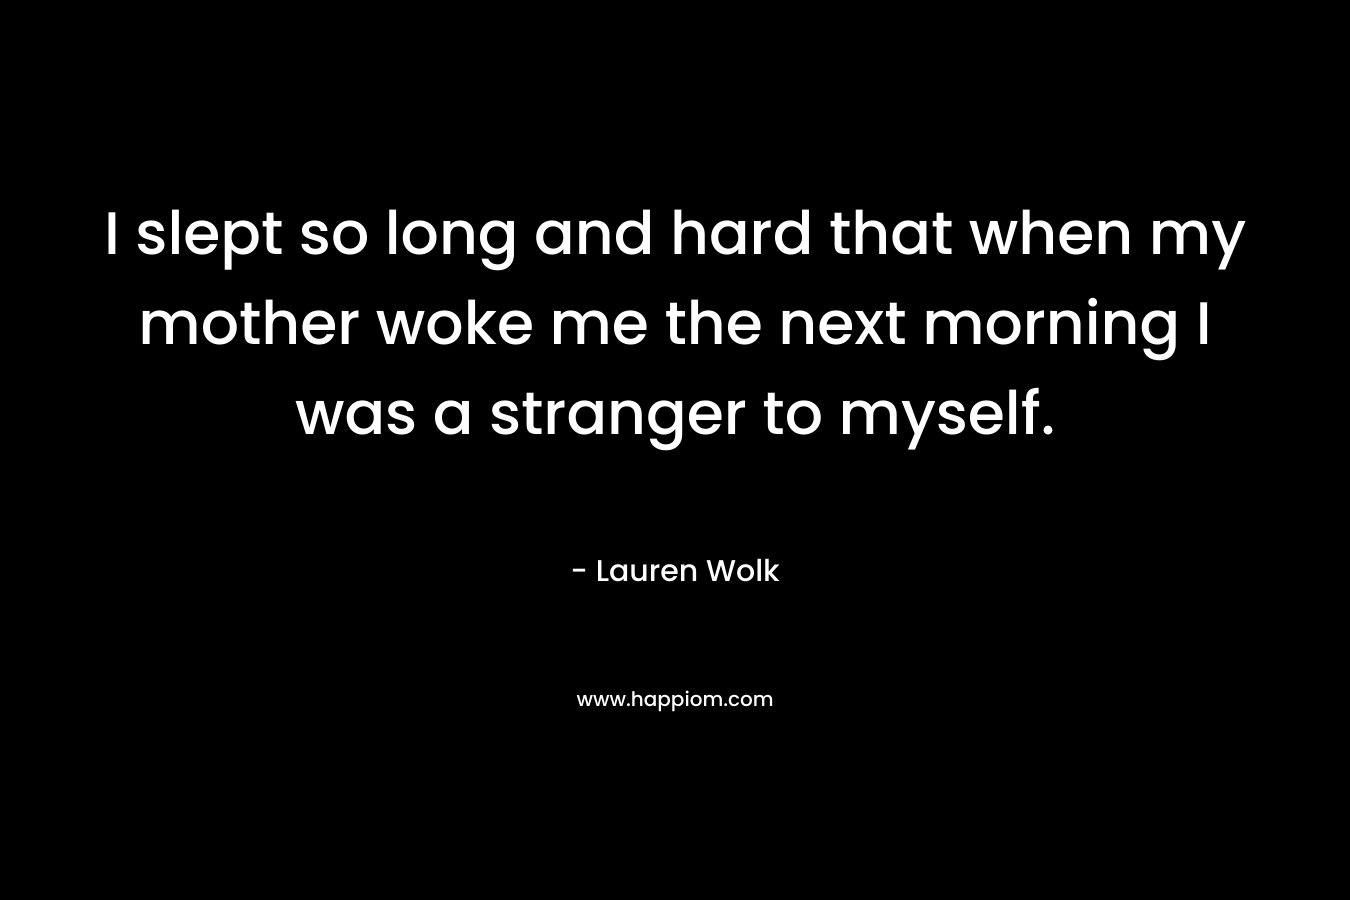 I slept so long and hard that when my mother woke me the next morning I was a stranger to myself.